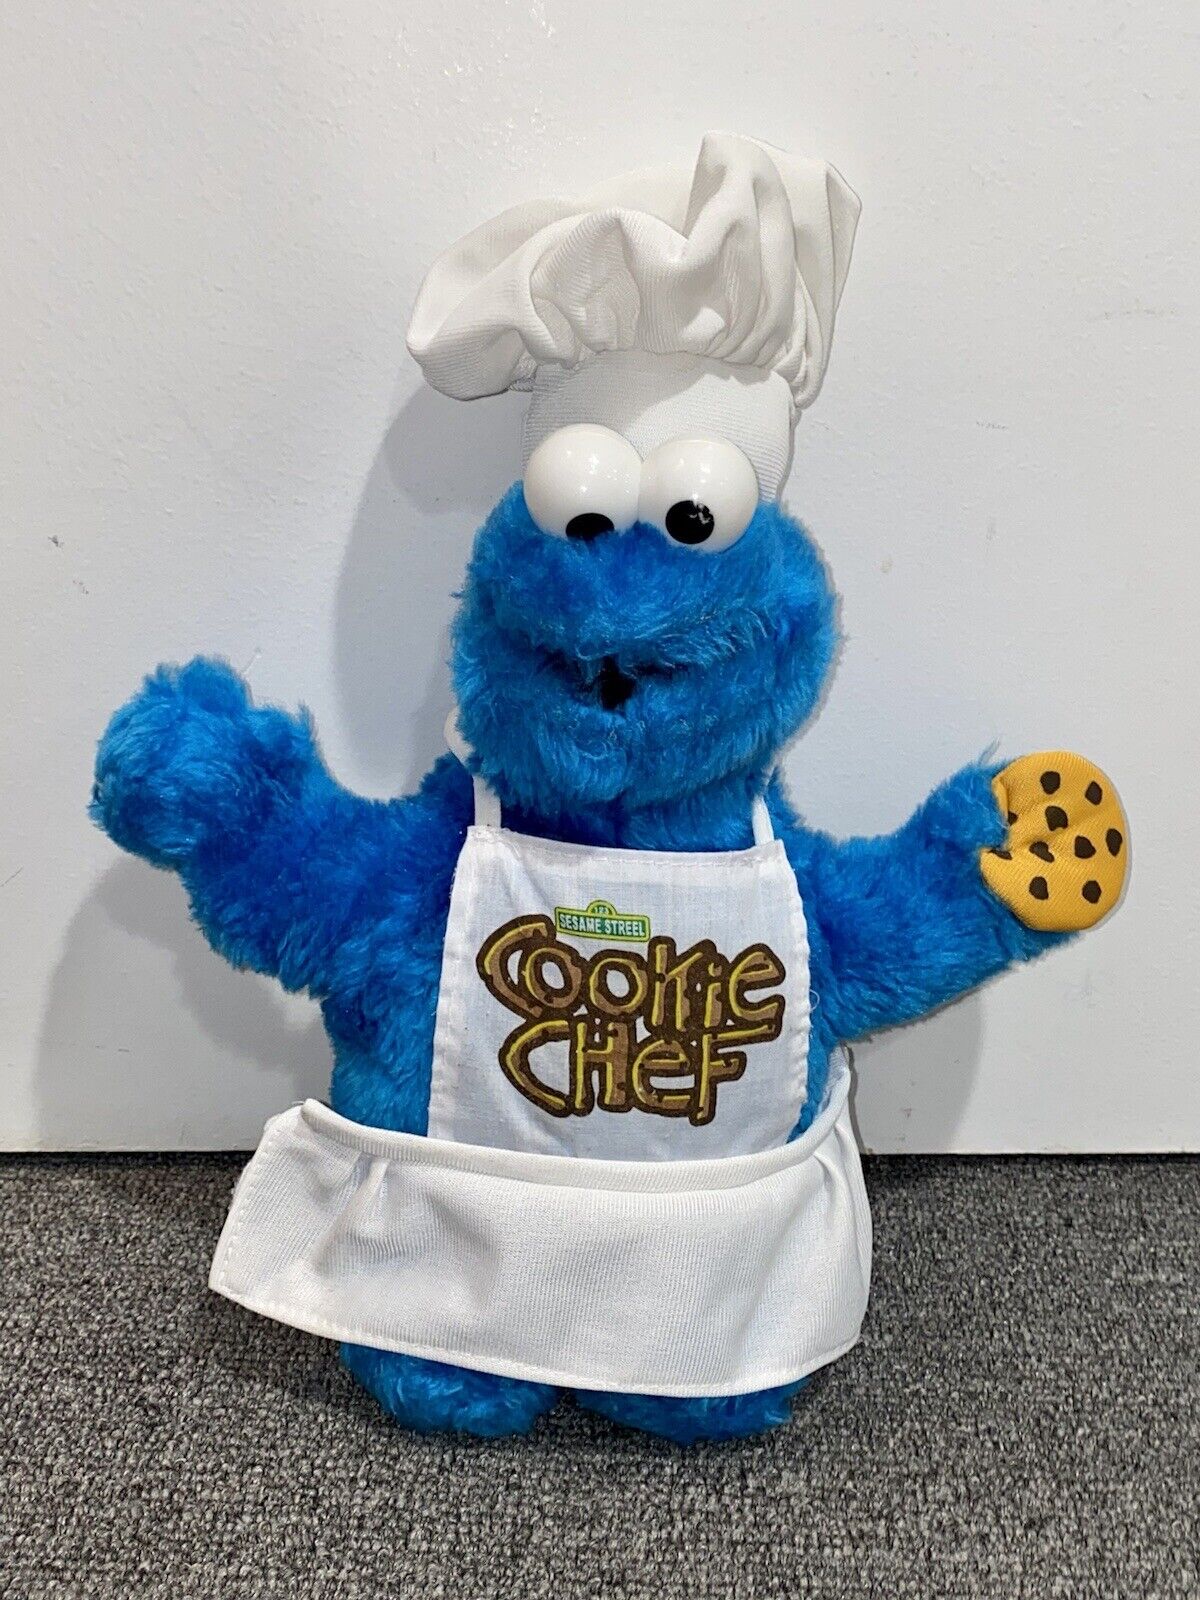 14” Sesame Street Cookie Monster Cookie Chef Plush Stuffed Animal Doll Apron Toy